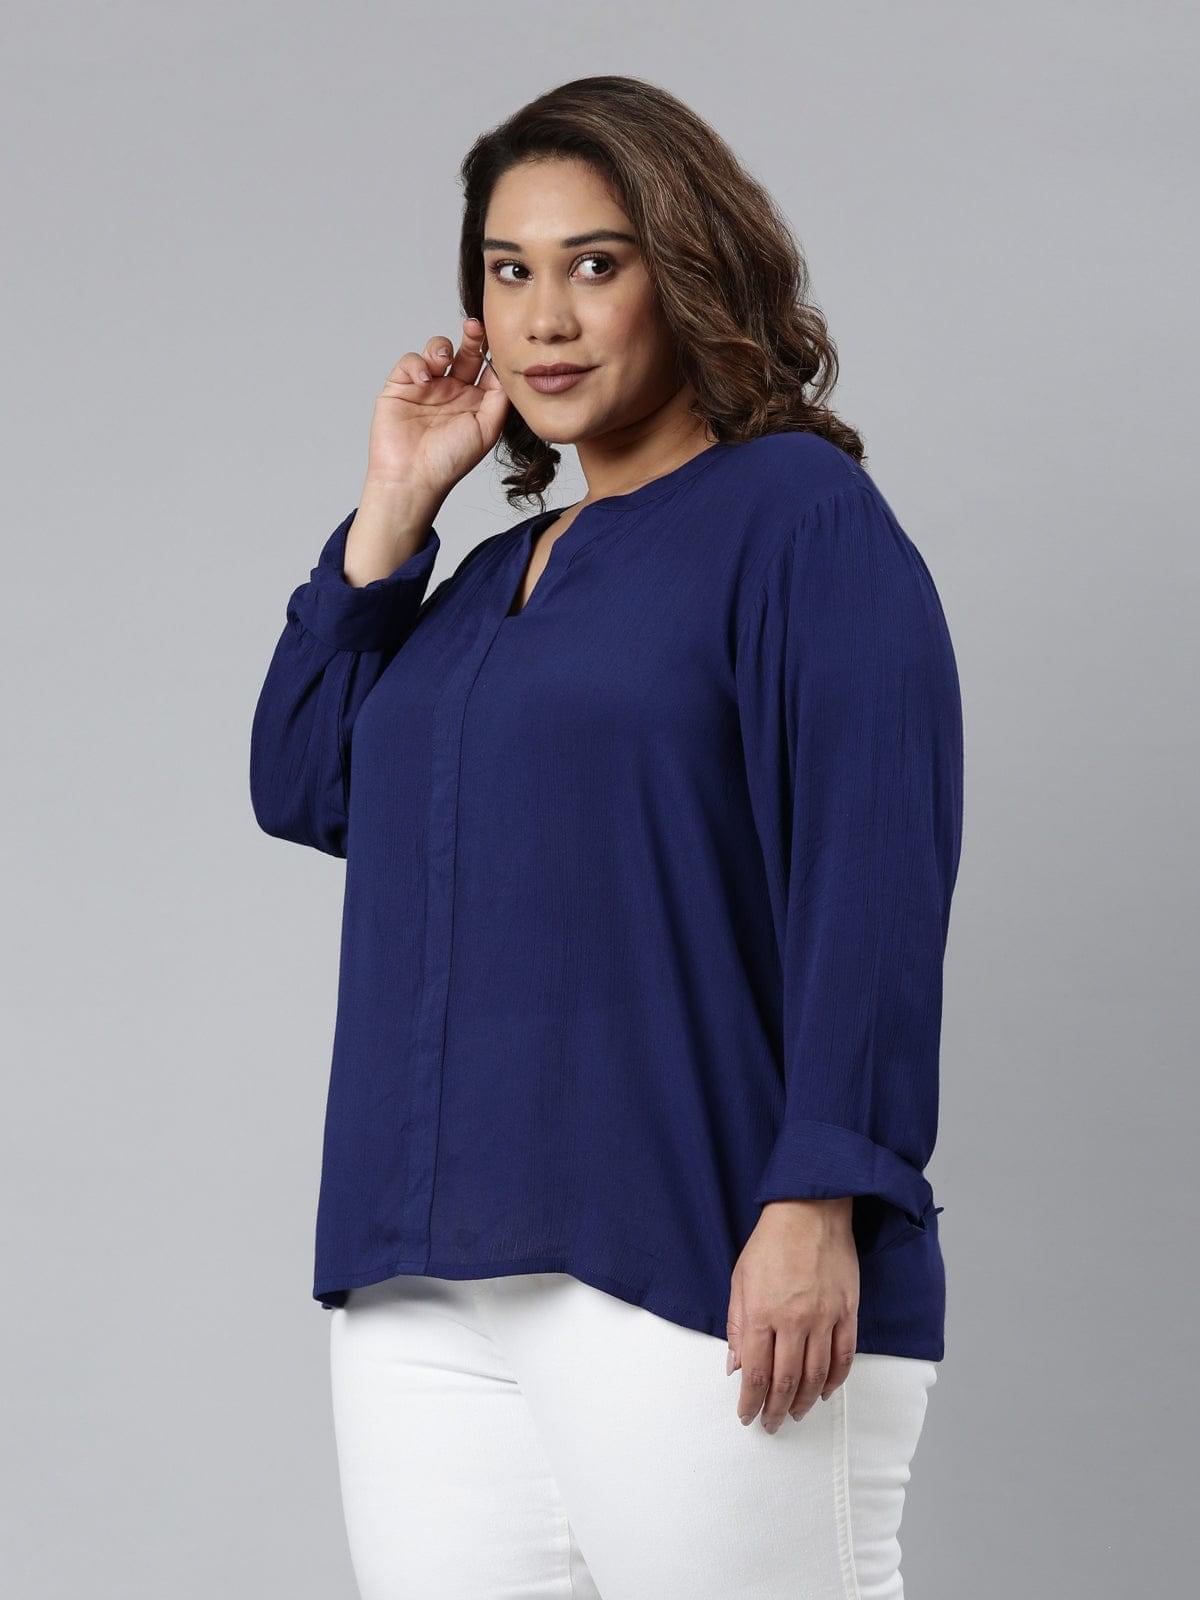 buy  women's blue shirt on online by the Shaili low price